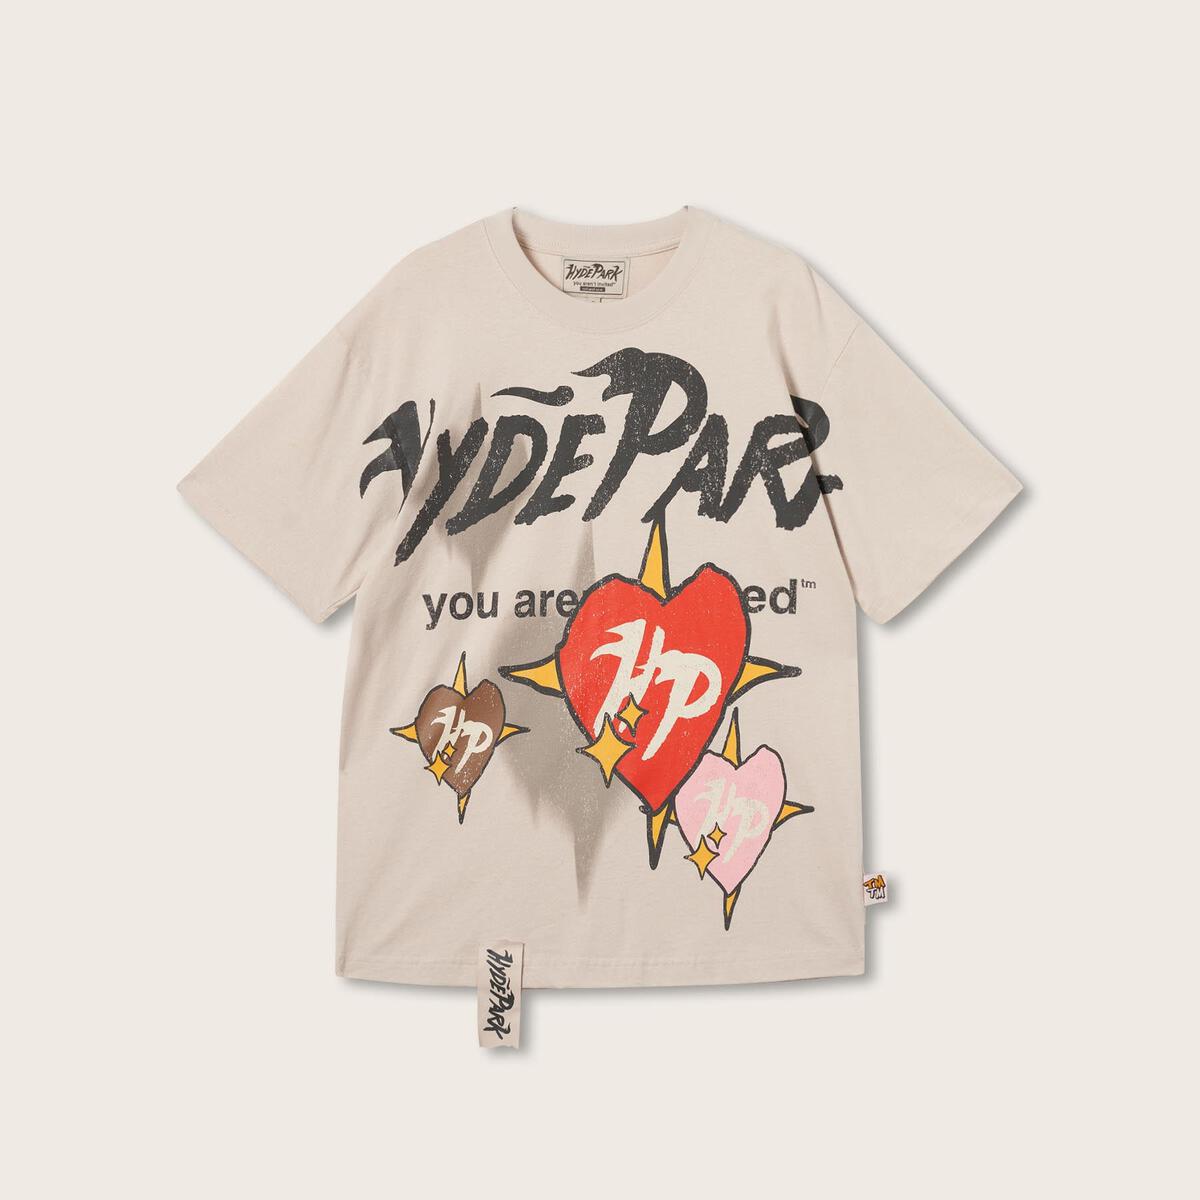 HYDEPARK FADED HEARTS TEE - OFF WHITE